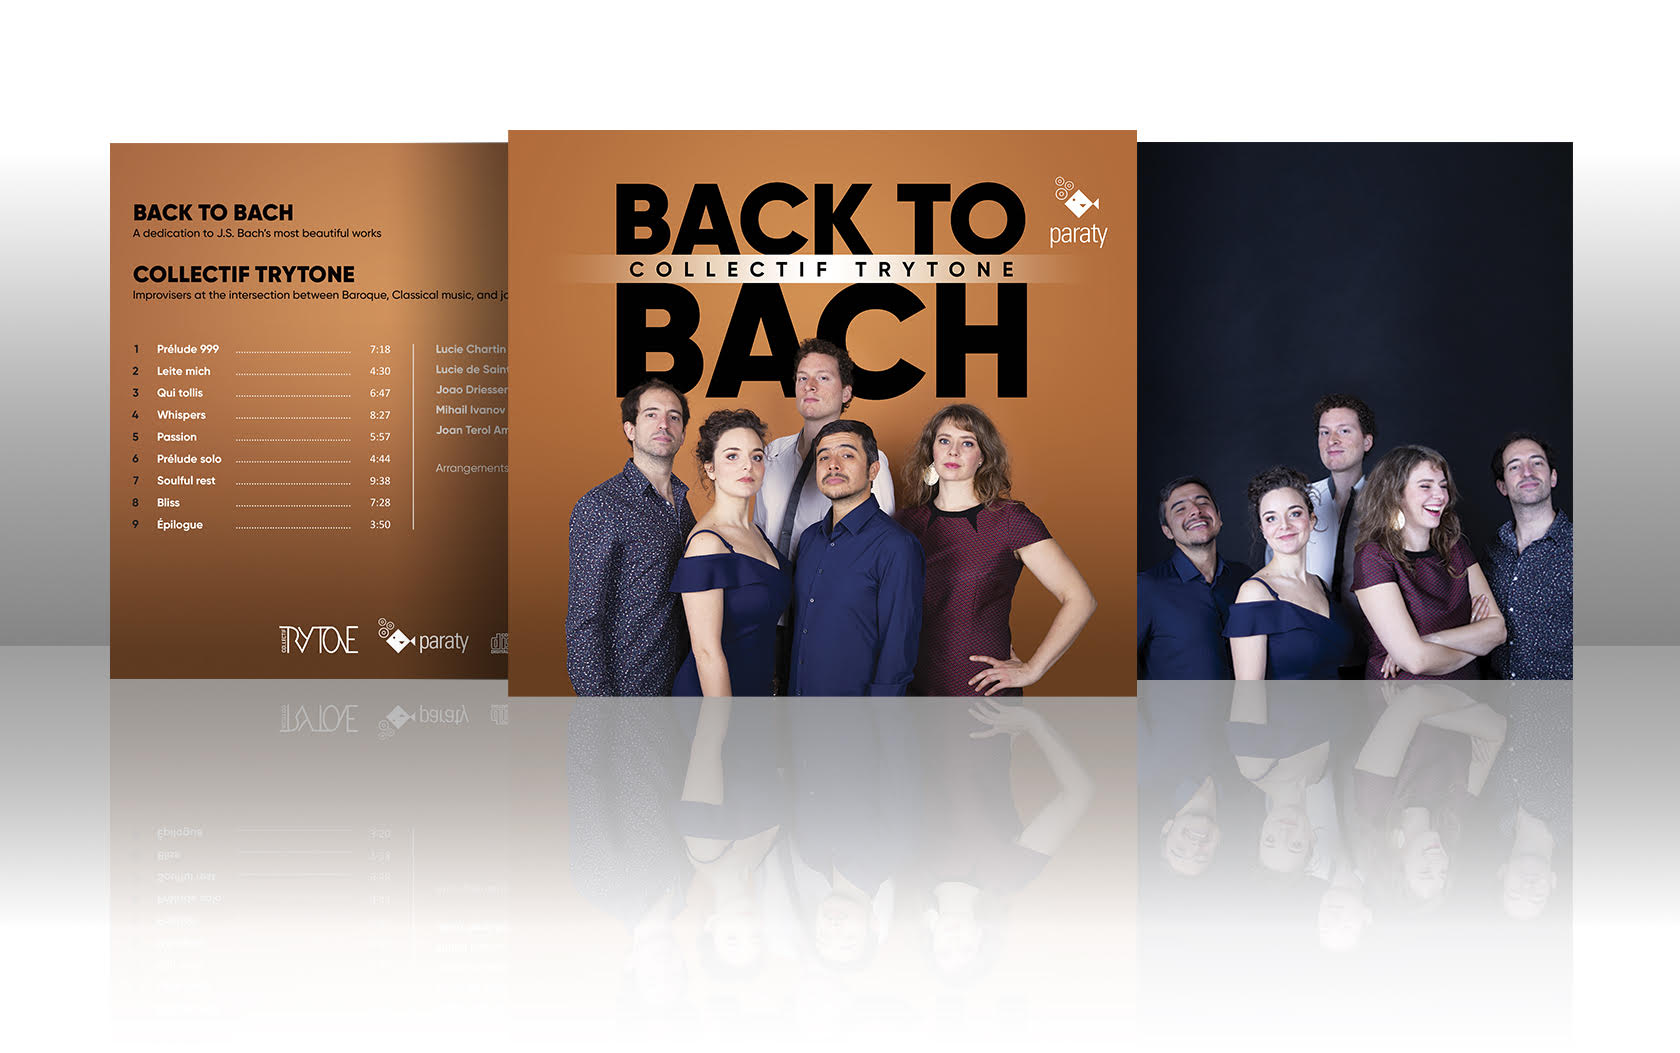 Sortie CD “BACK TO BACH”